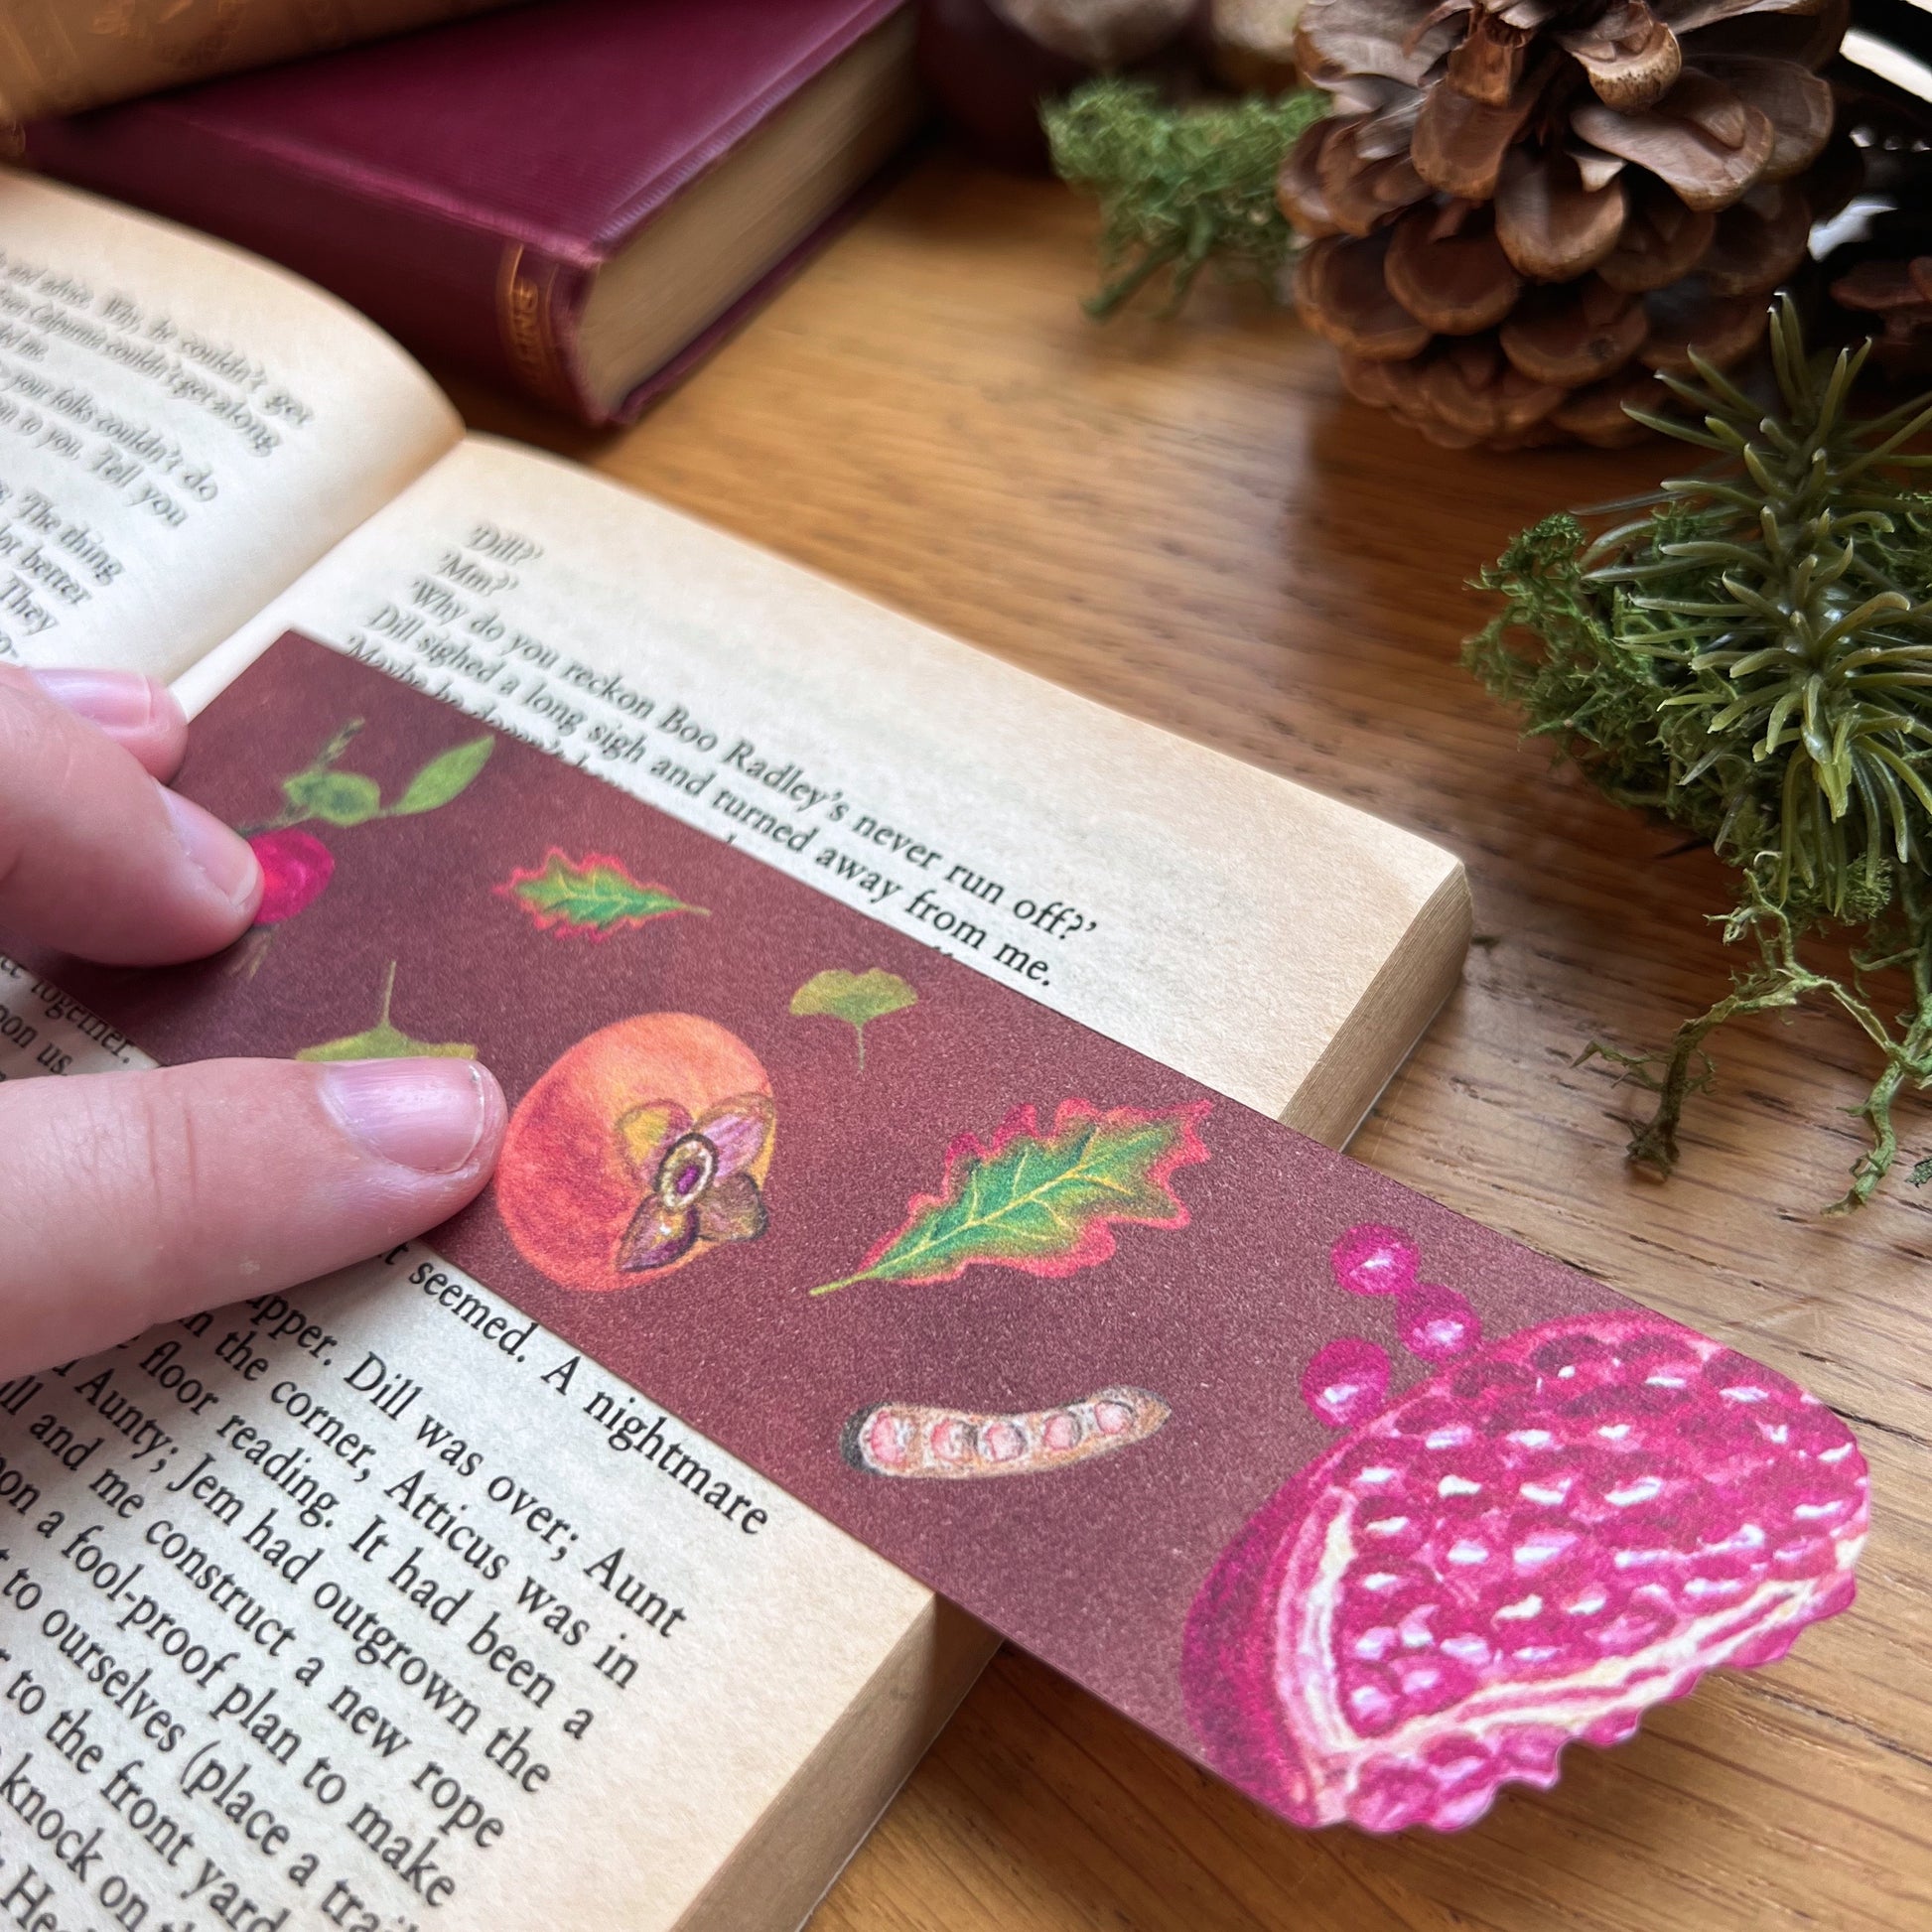 Woodland Walk Fruits Bookmark being used to read the open pages of a book. Bookmark features a pomegranate cut out at the top, and has autumnal leaves, persimmon, rose hips and seed pods illustrated across a warm toned brown background.